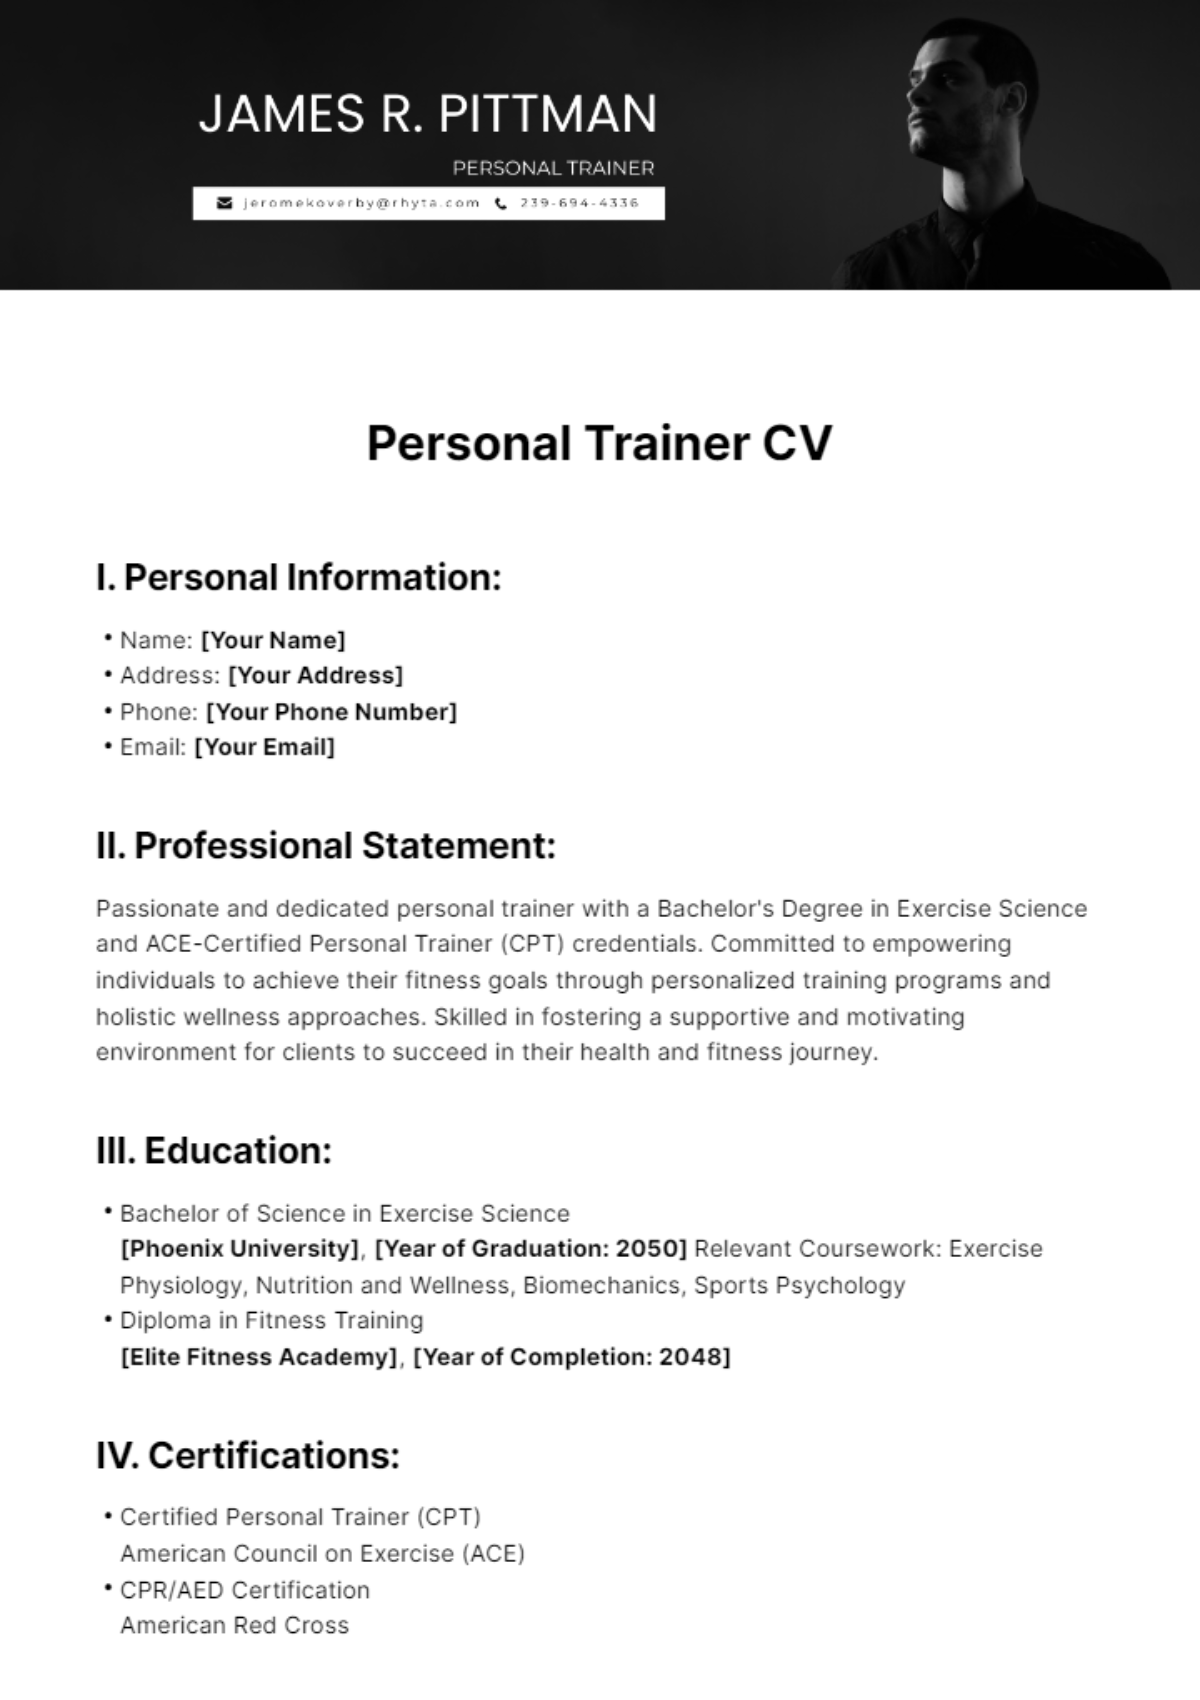 Personal Trainer CV Template